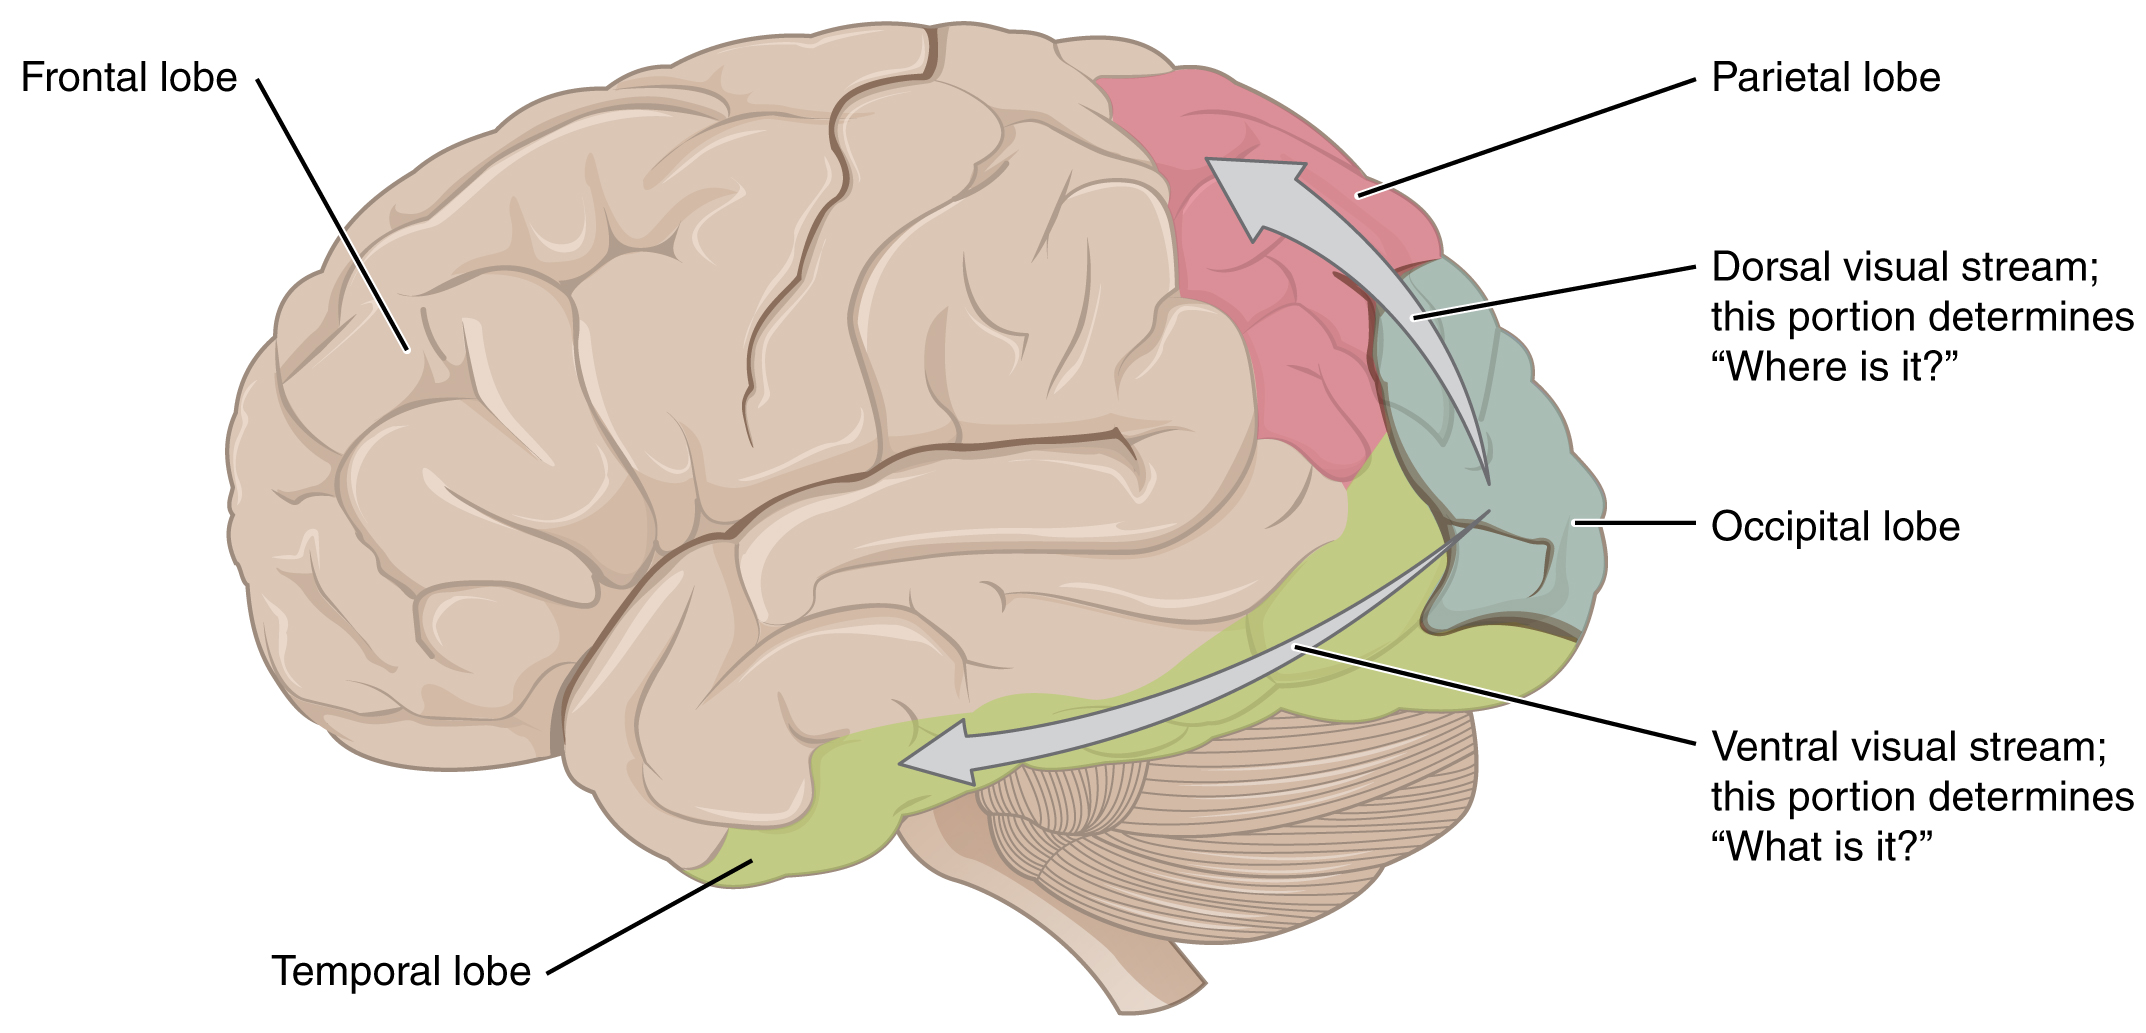 This image shows the side of the human brain and maps different regions to different visual functions.